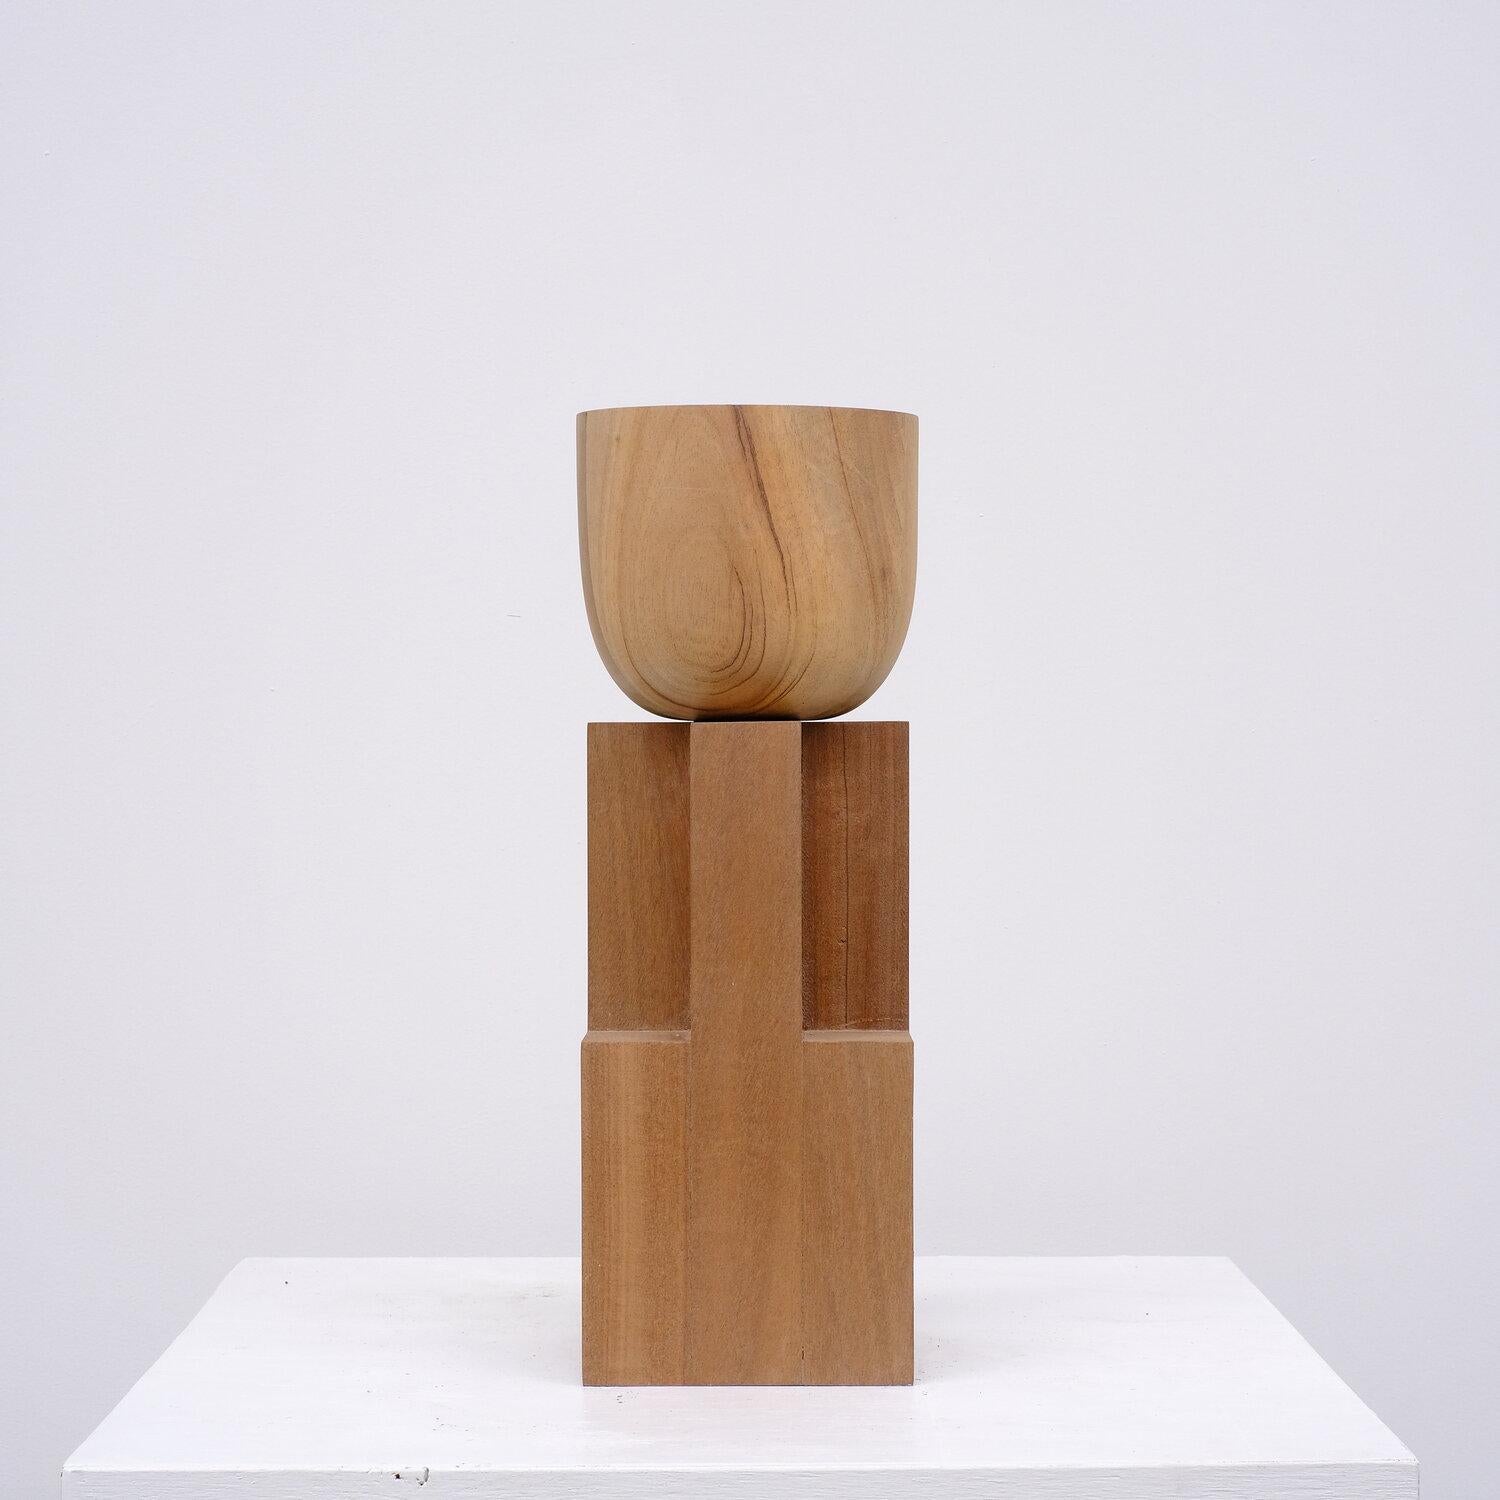 Contemporarybowl in walnut, goblet bowl by Arno Declercq

Material: African Walnut
Dimensions: Dimensions: 40 cm H x 14 cm W x 14 cm D

Made by hand, in Belgium.

Arno Declercq
Belgian designer and art dealer who makes bespoke objects with